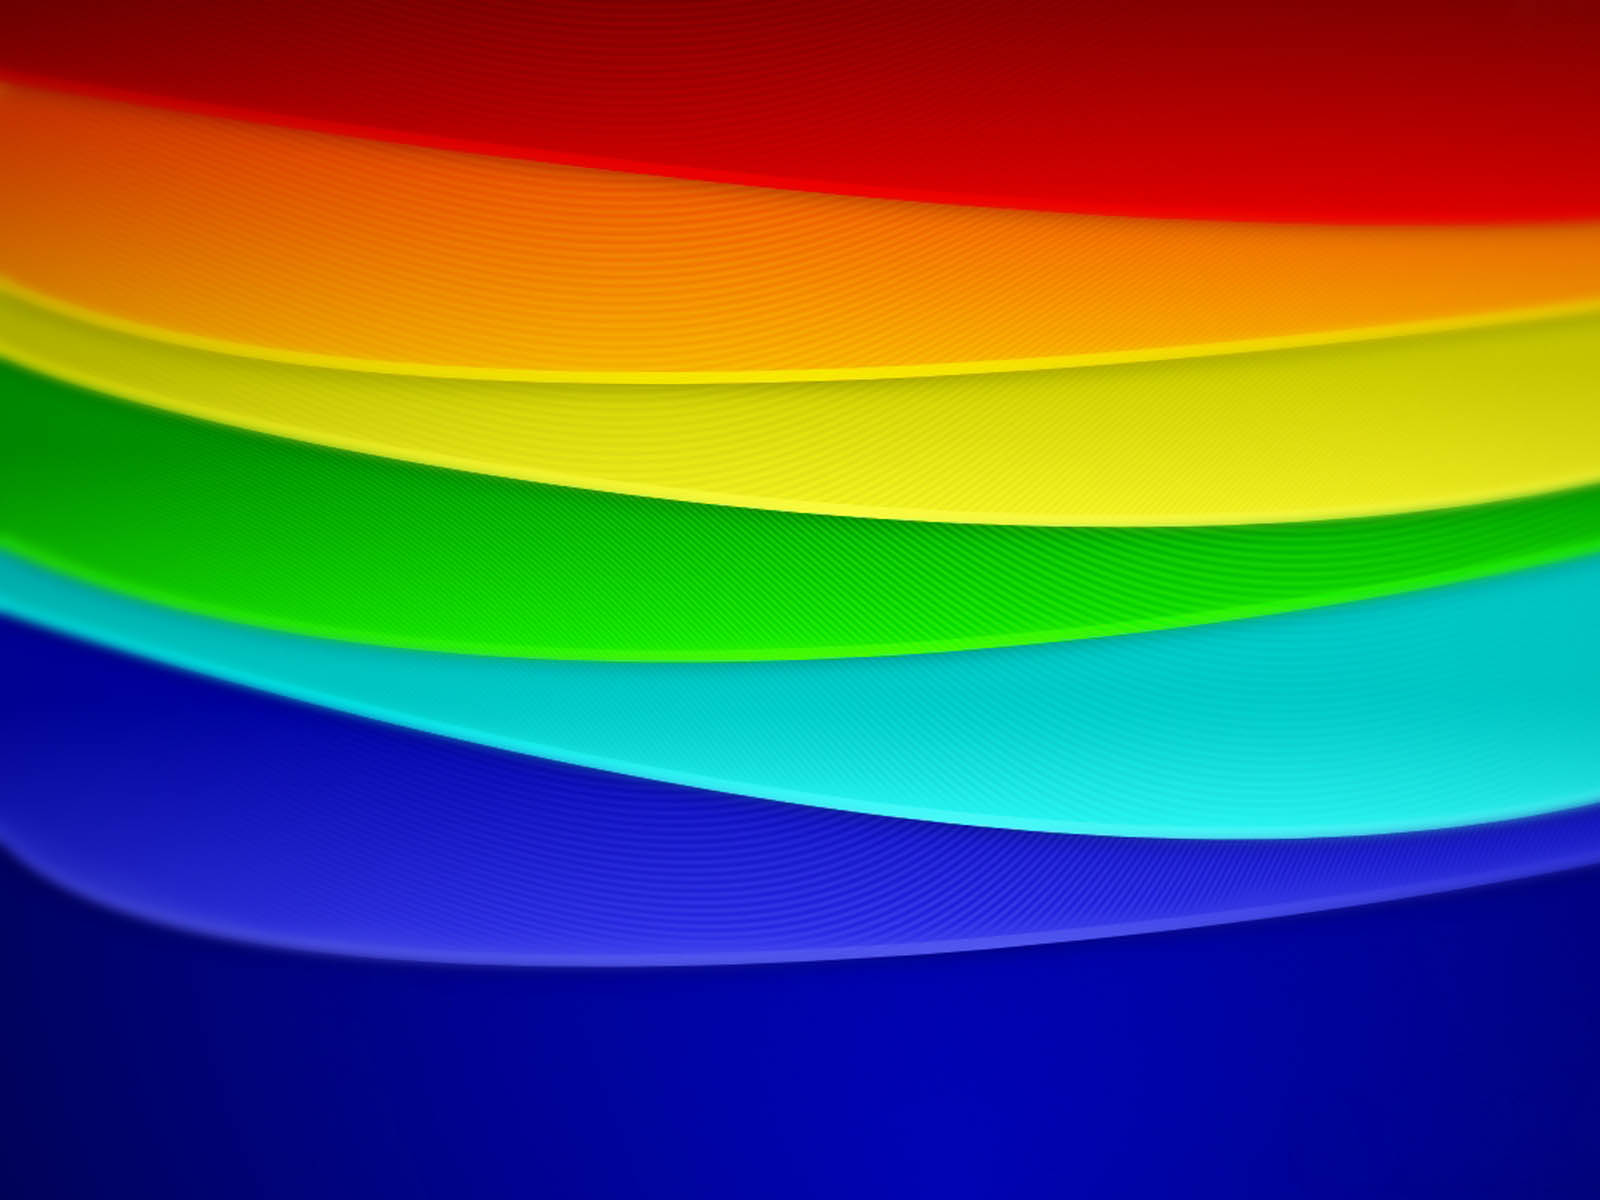 Rainbow Abstract Backgrounds 2651 Hd Wallpapers in Abstract   Imagesci